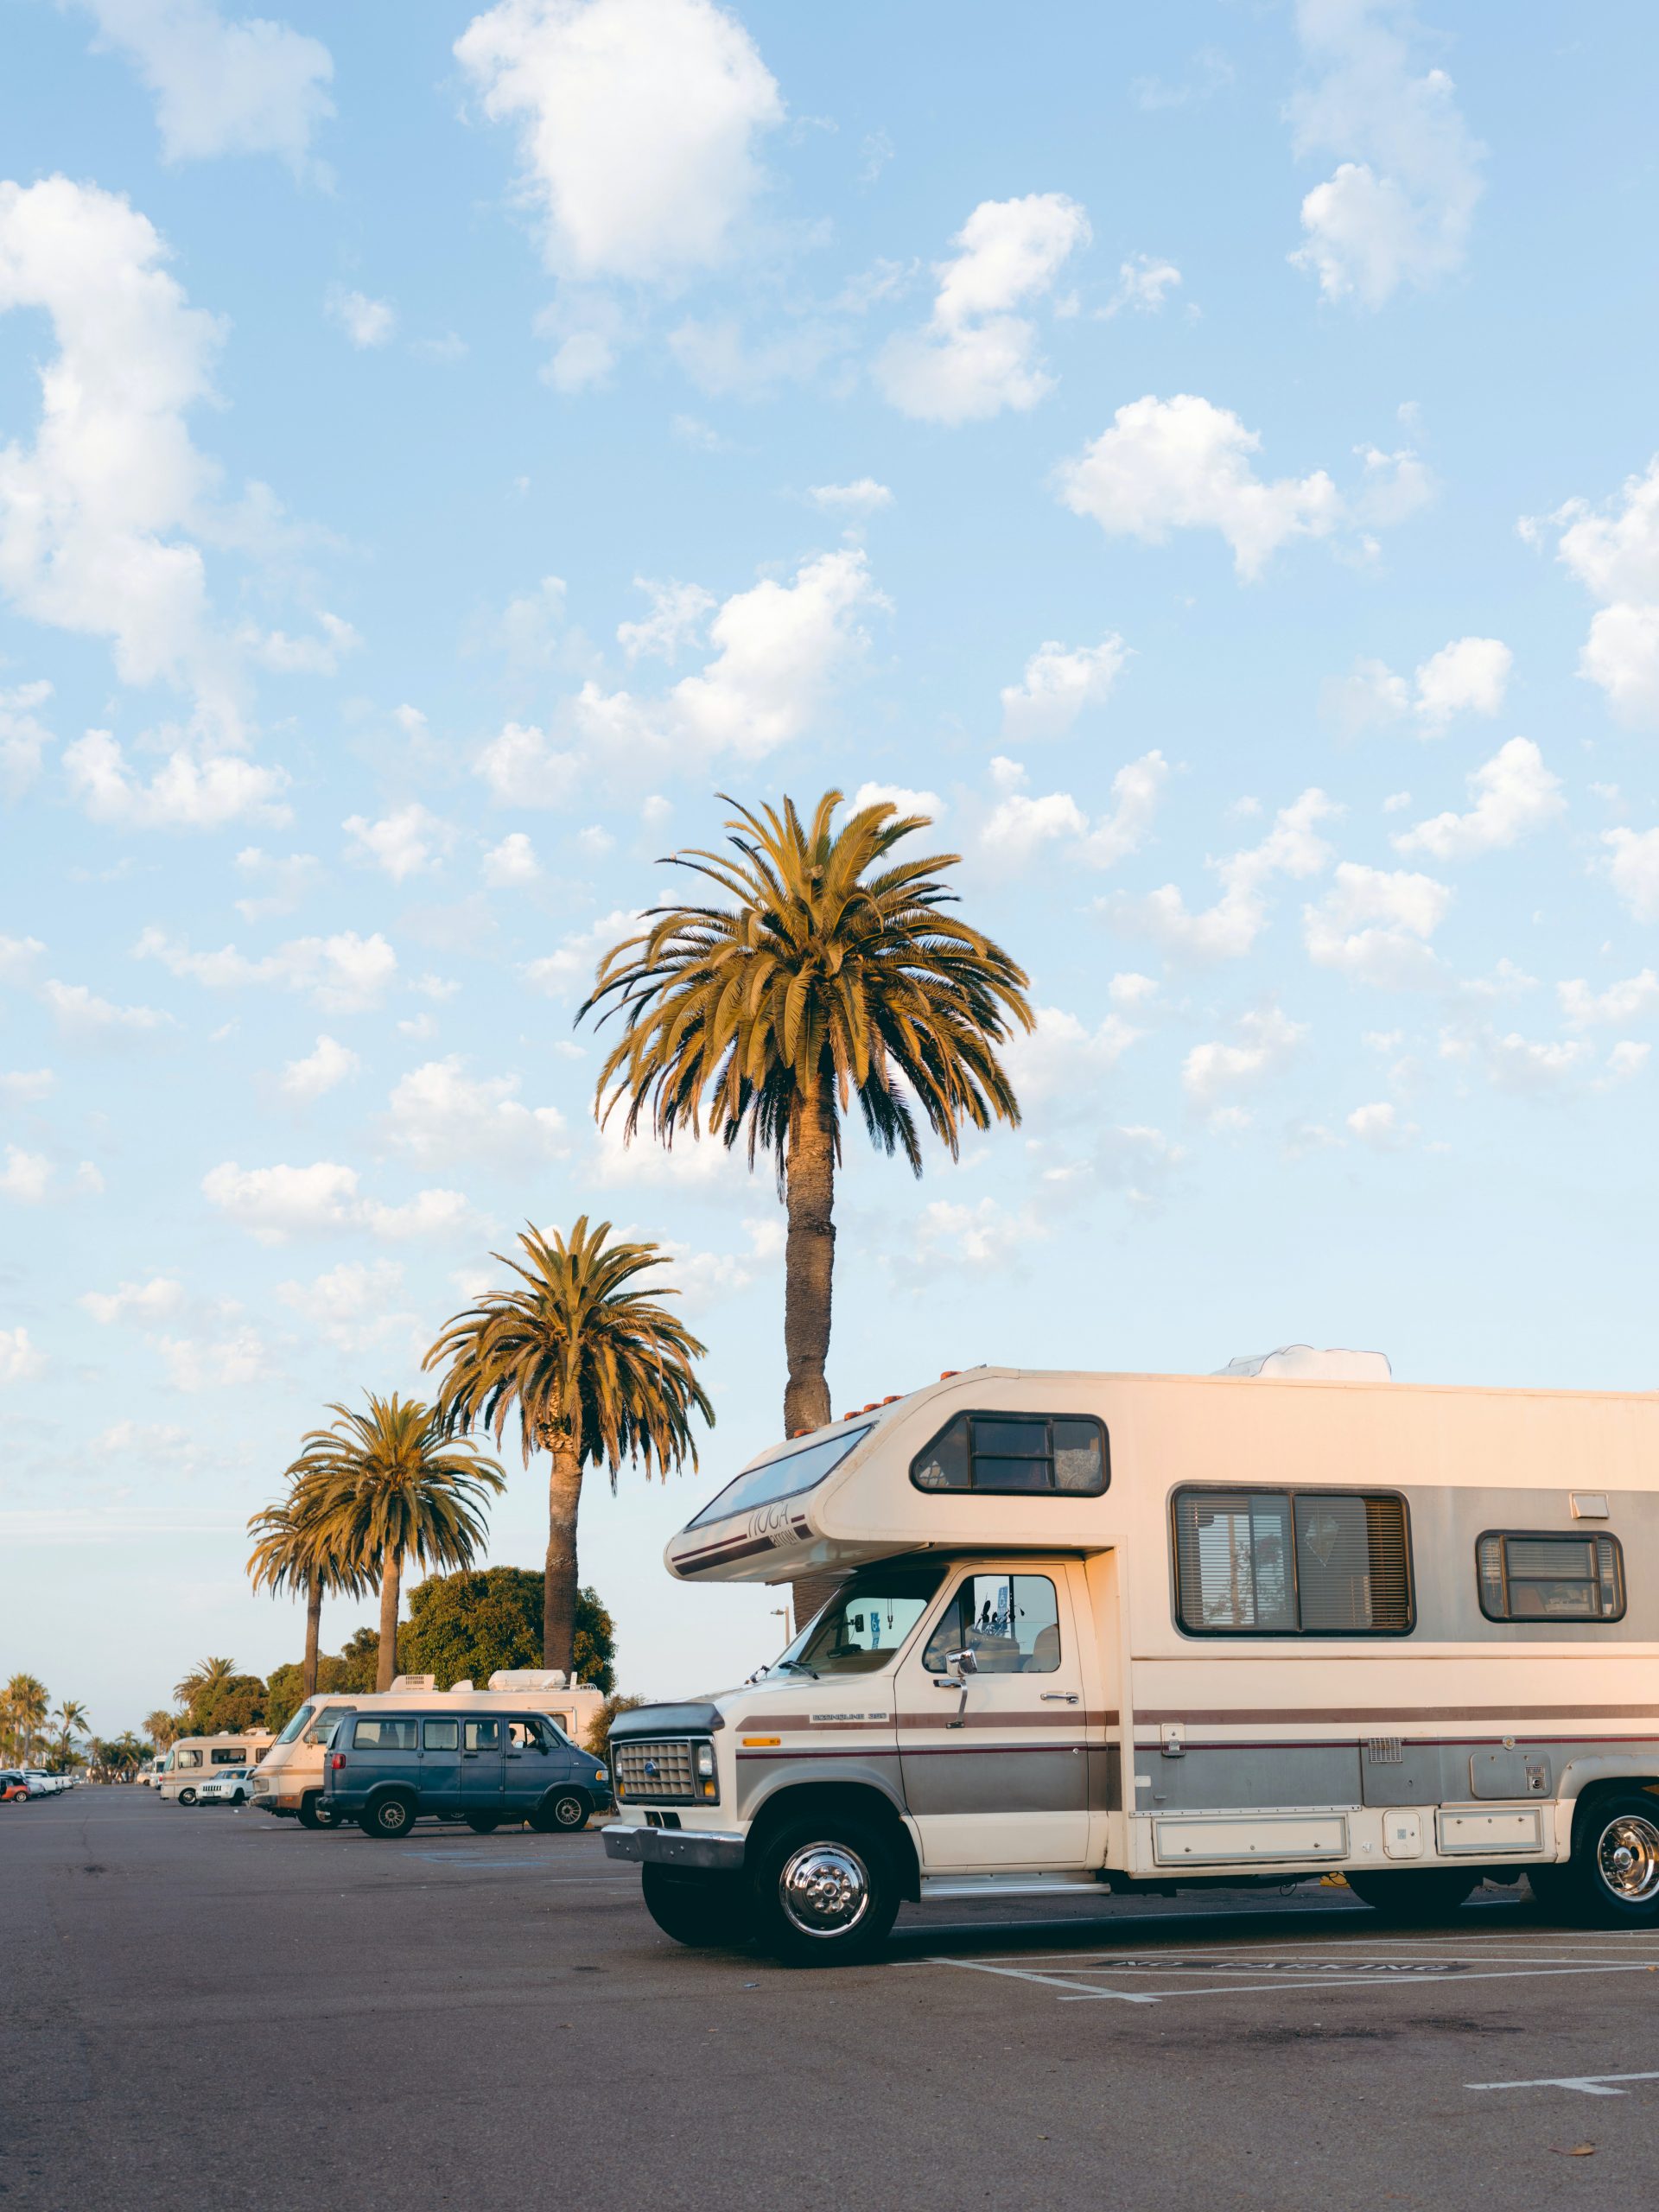 RV in parking lot with three palms trees angled down with light blue sky and white clouds.